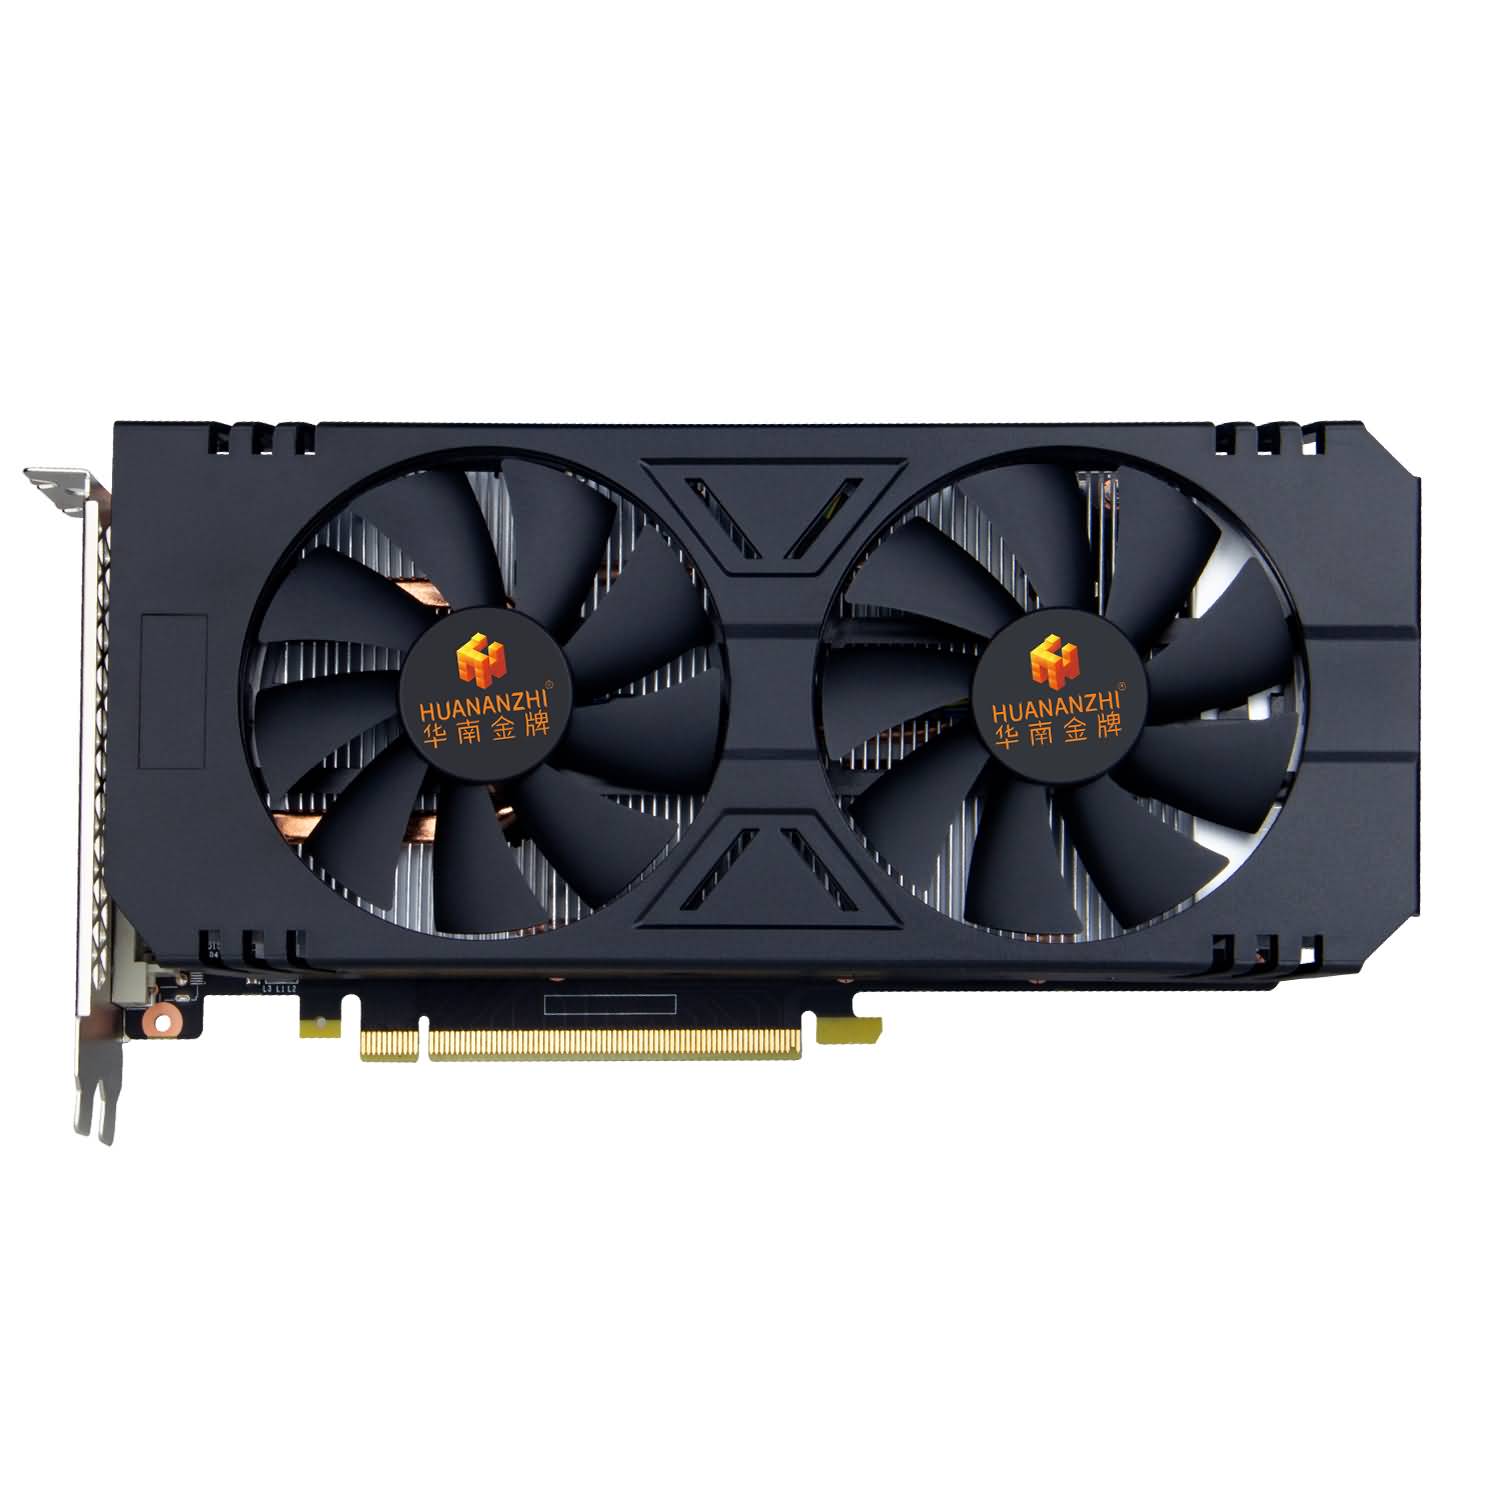 Download Huananzhi RTX2060S 8G Graphics Card Free